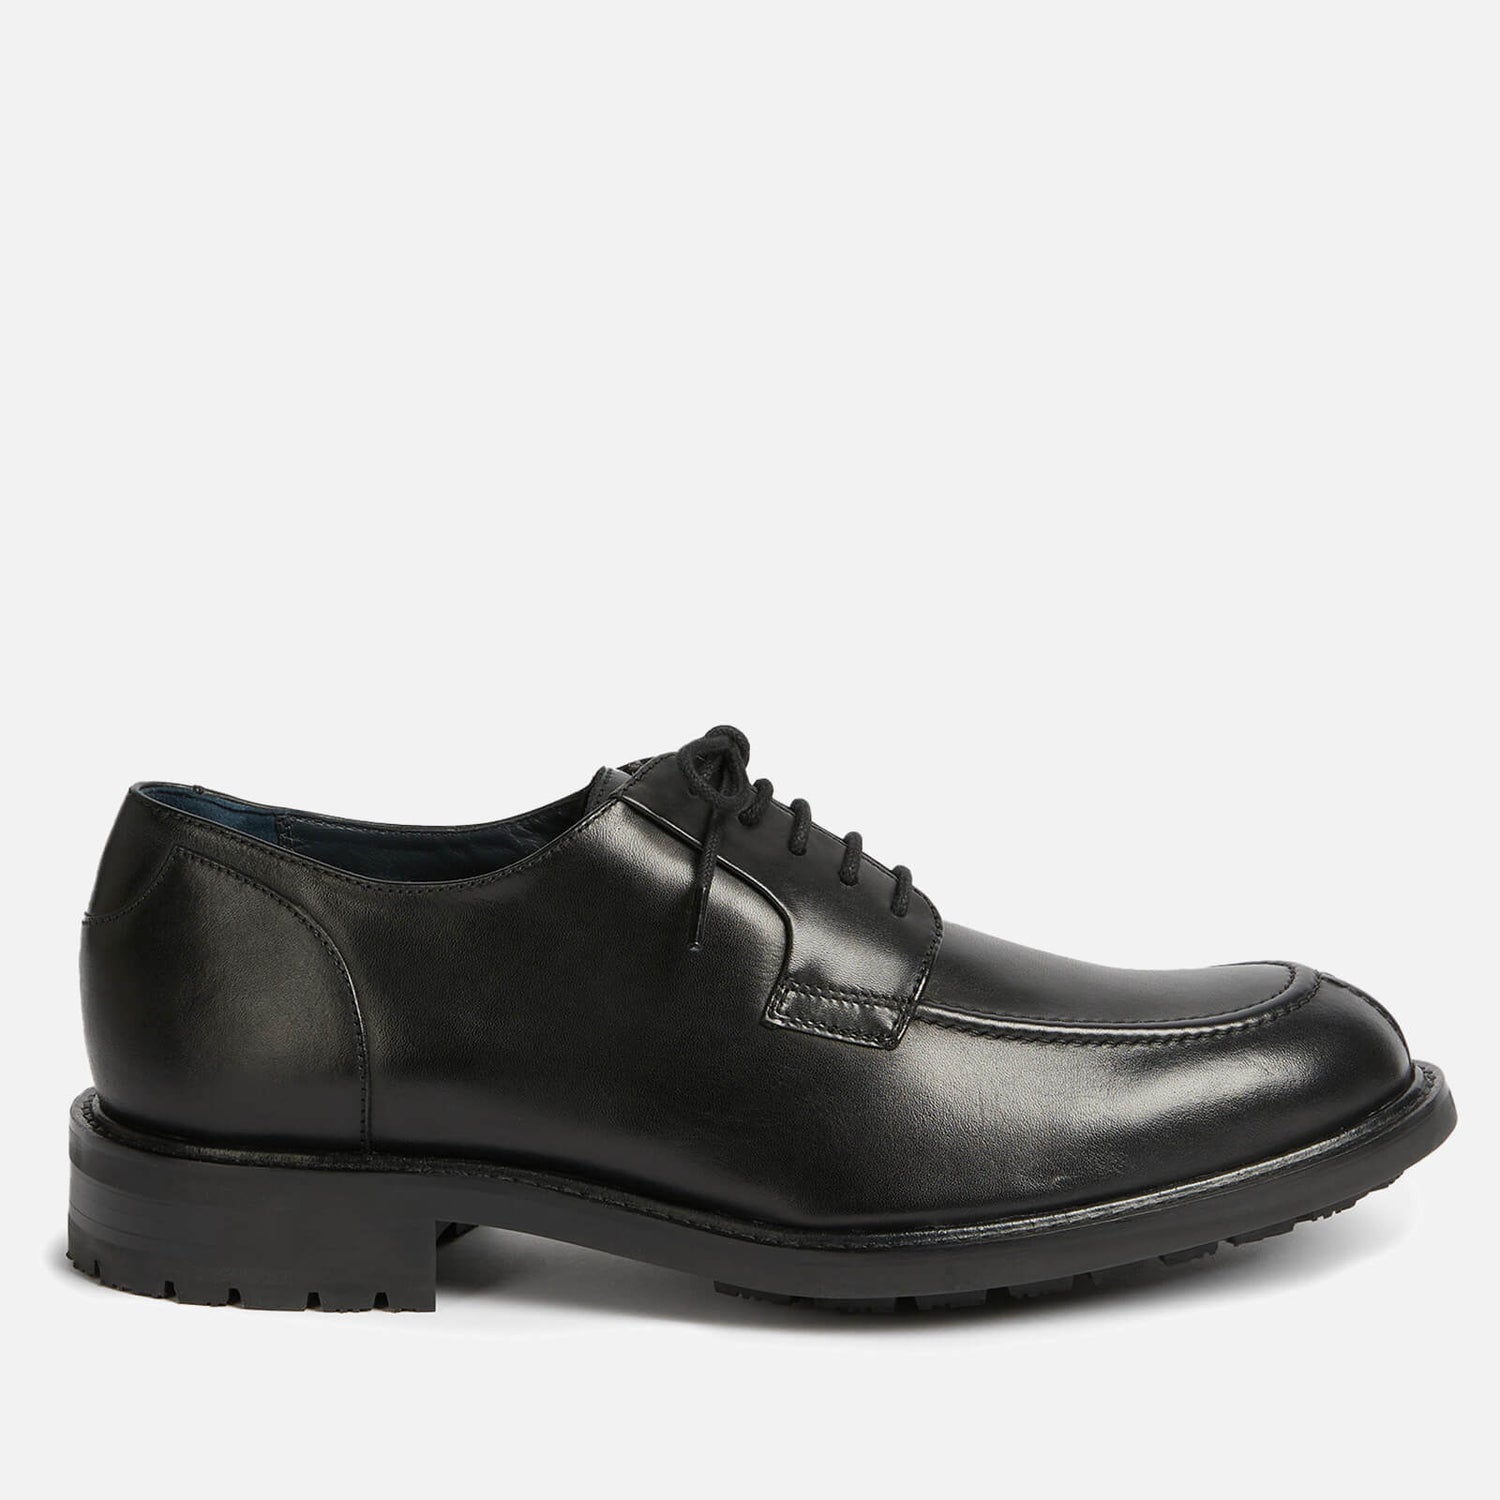 Ted Baker Men's Paddy Derby Shoes - Black